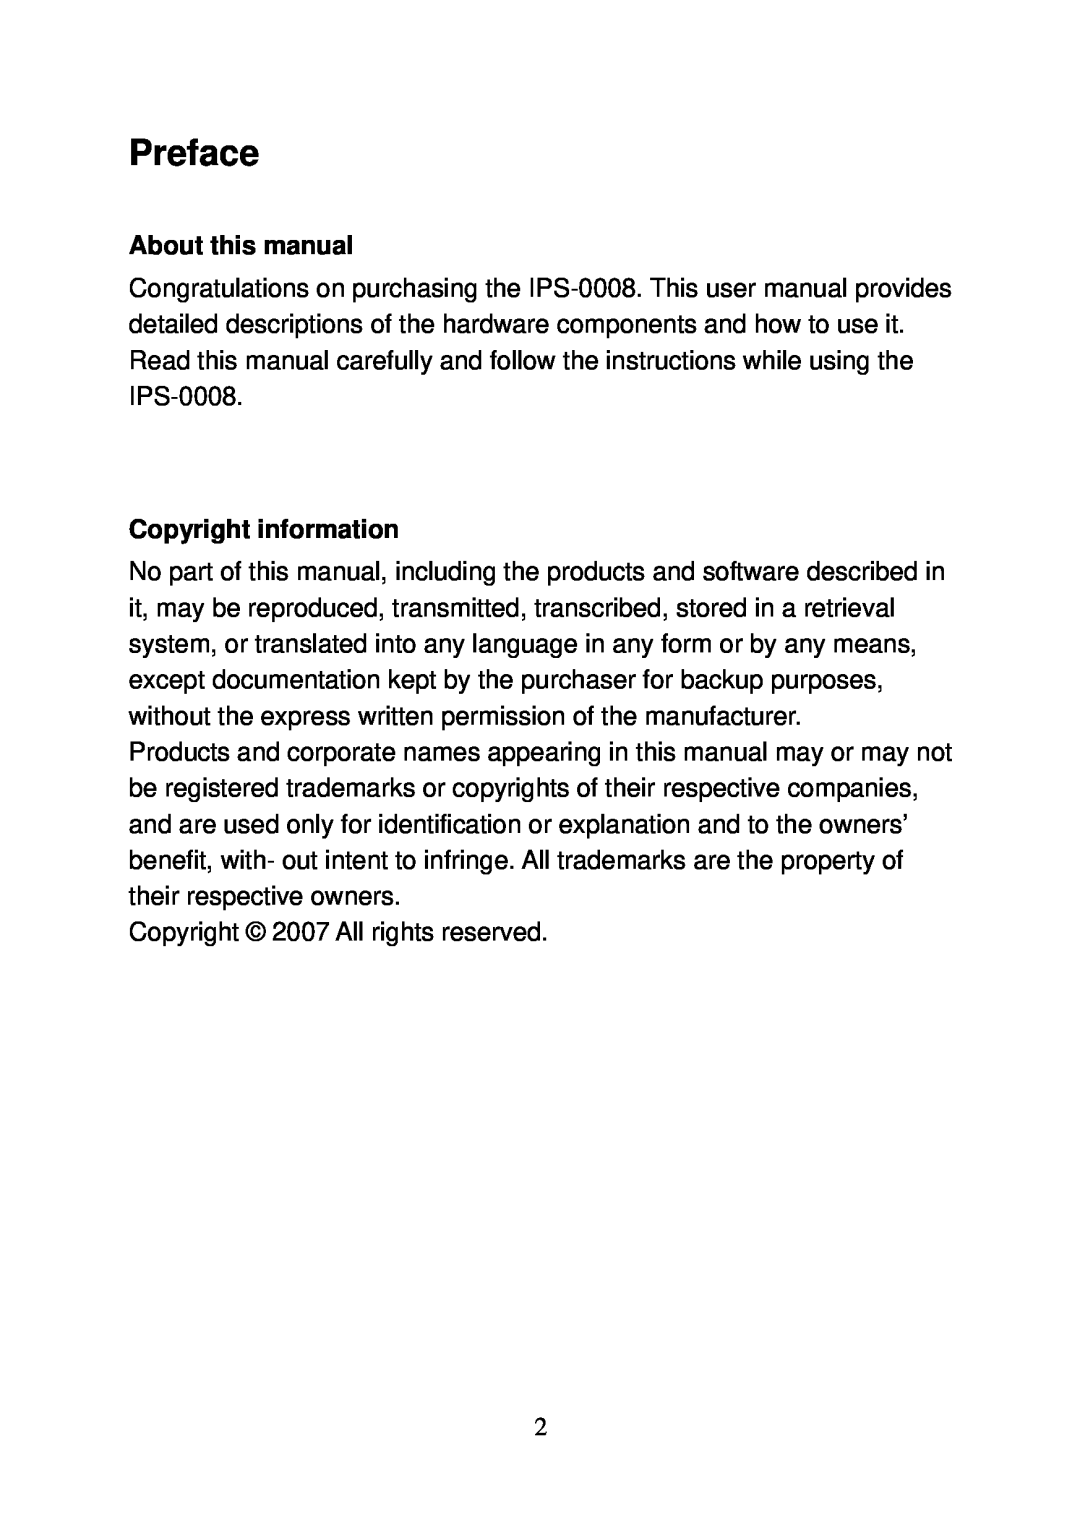 LevelOne IPS-0008 user manual Preface, About this manual, Copyright information 